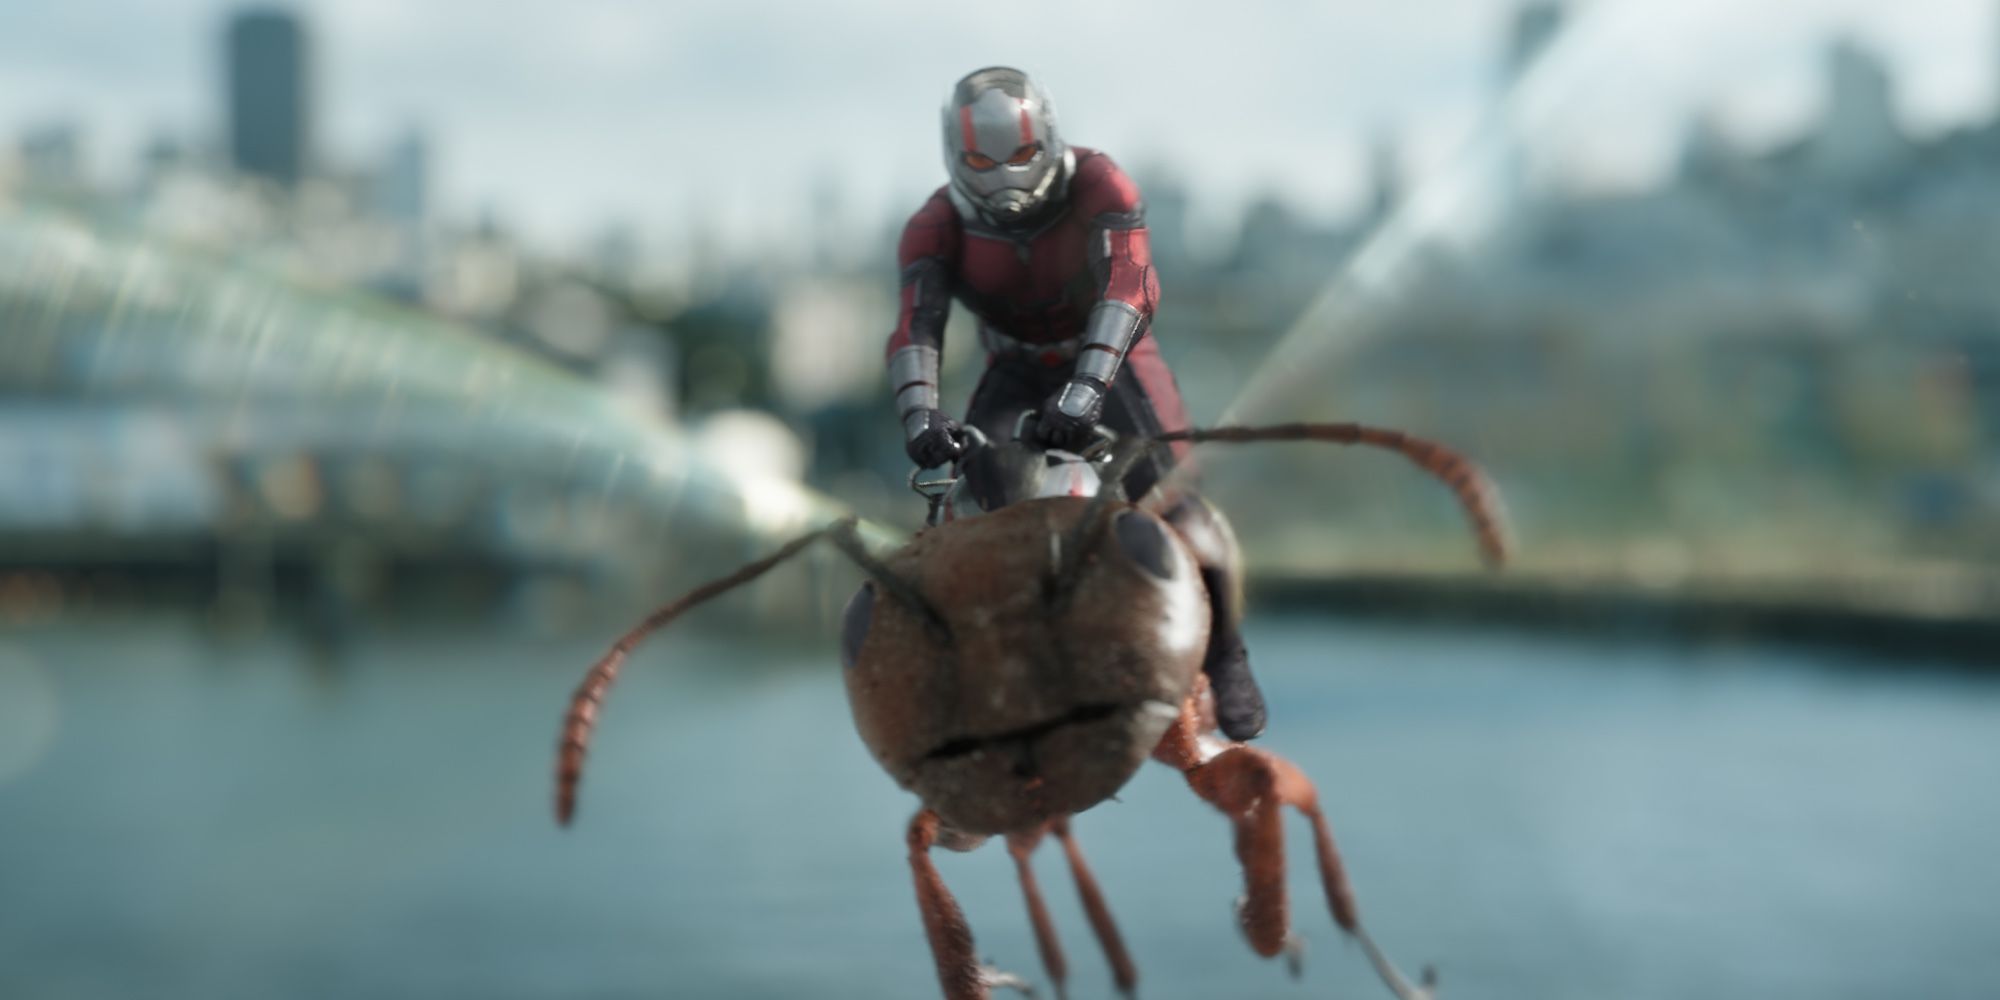 Scott Lang riding an ant in Ant-Man and the Wasp